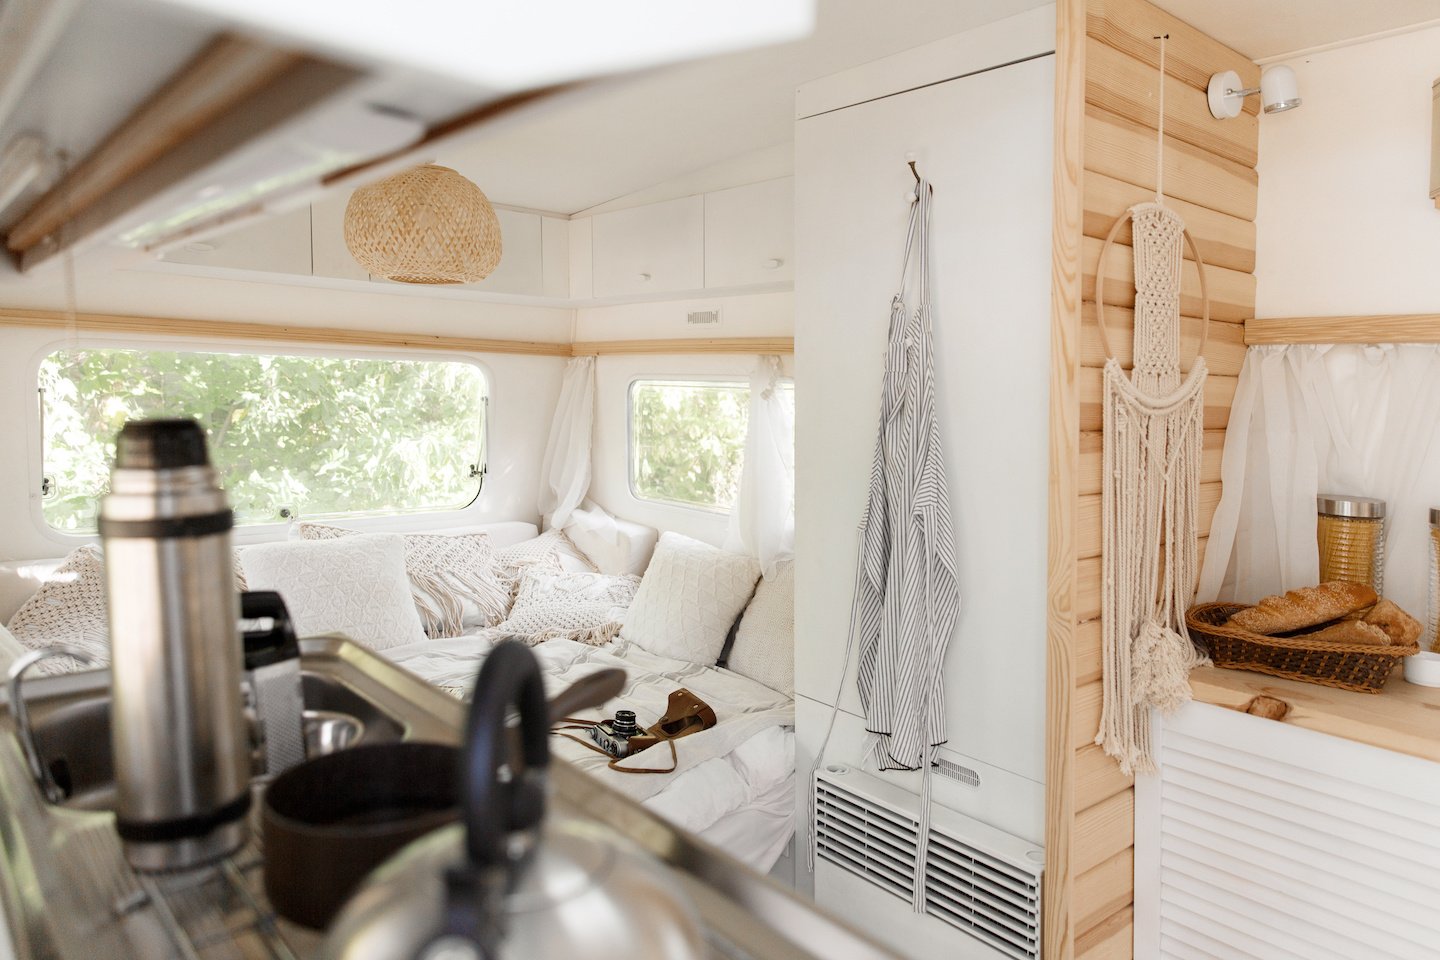 All white RV interior as inspiration for Plyco's white laminated poplar plywood